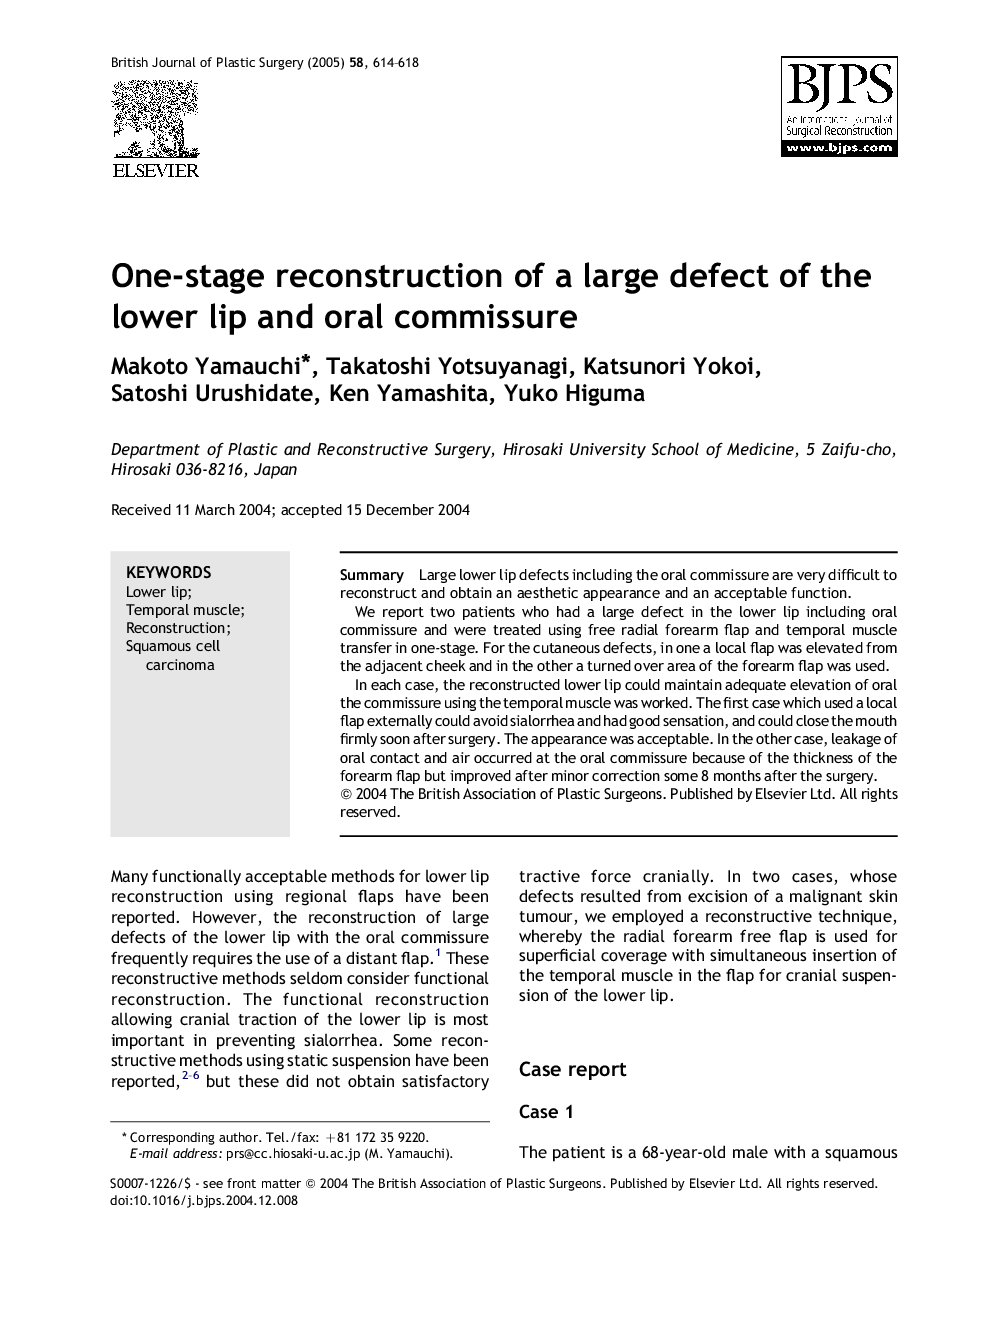 One-stage reconstruction of a large defect of the lower lip and oral commissure